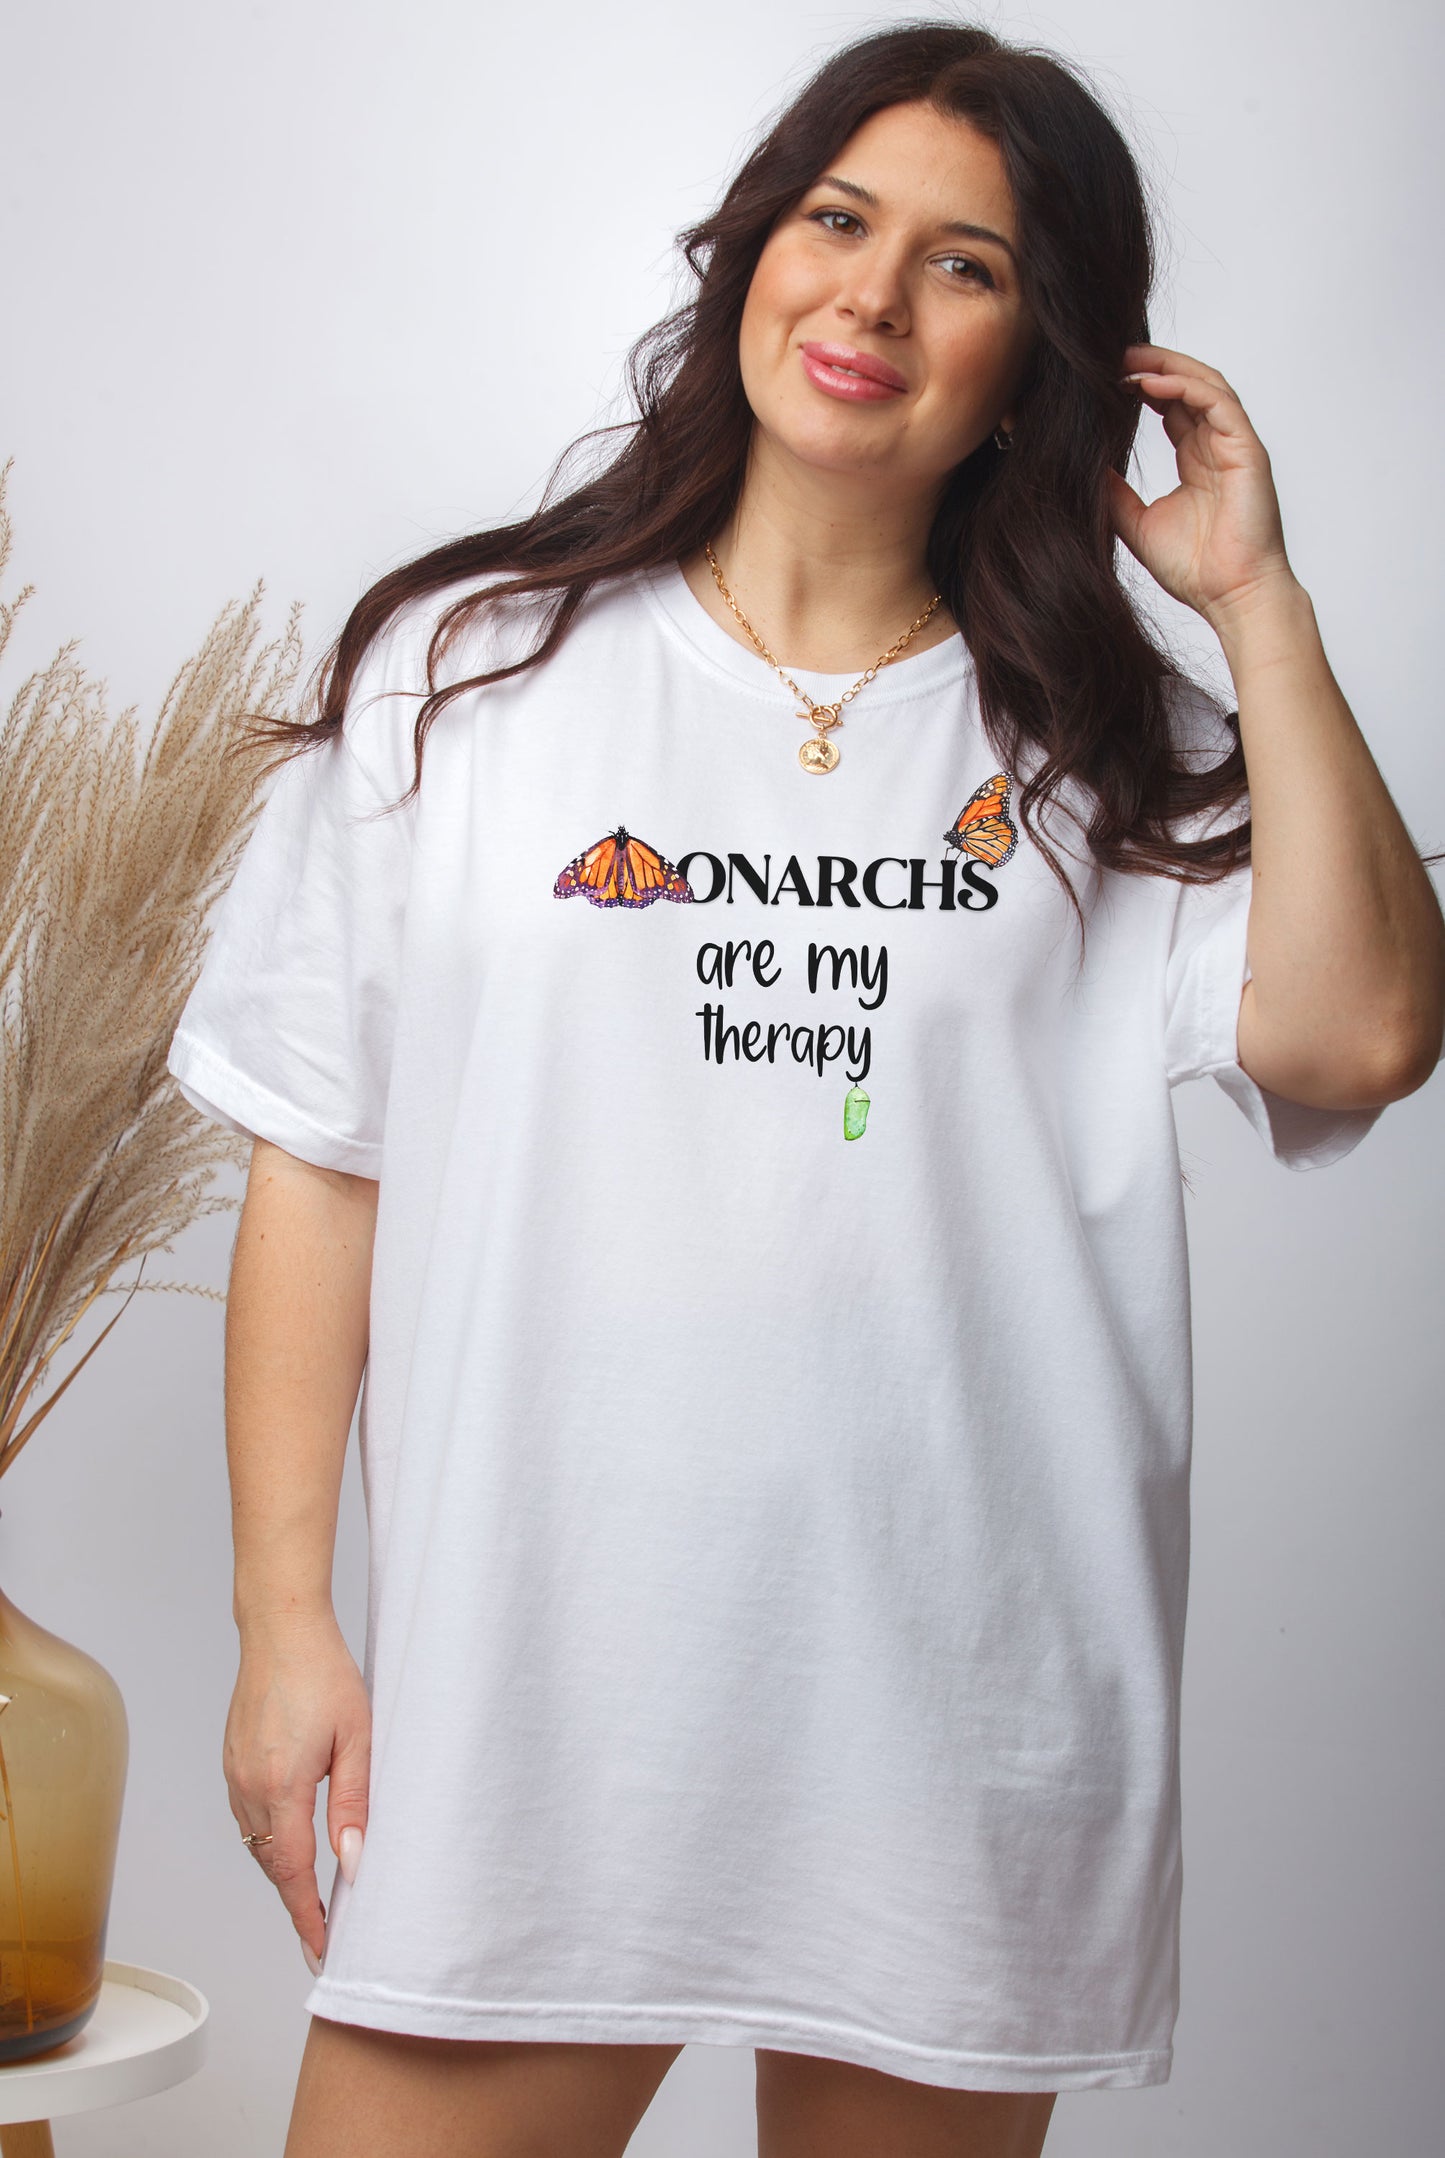 Monarchs are my Therapy Unisex T-shirt, Nature Lover's Gift, Comfort Tee, Butterfly Art Shirt, Conservation, Environmental Cause Shirt